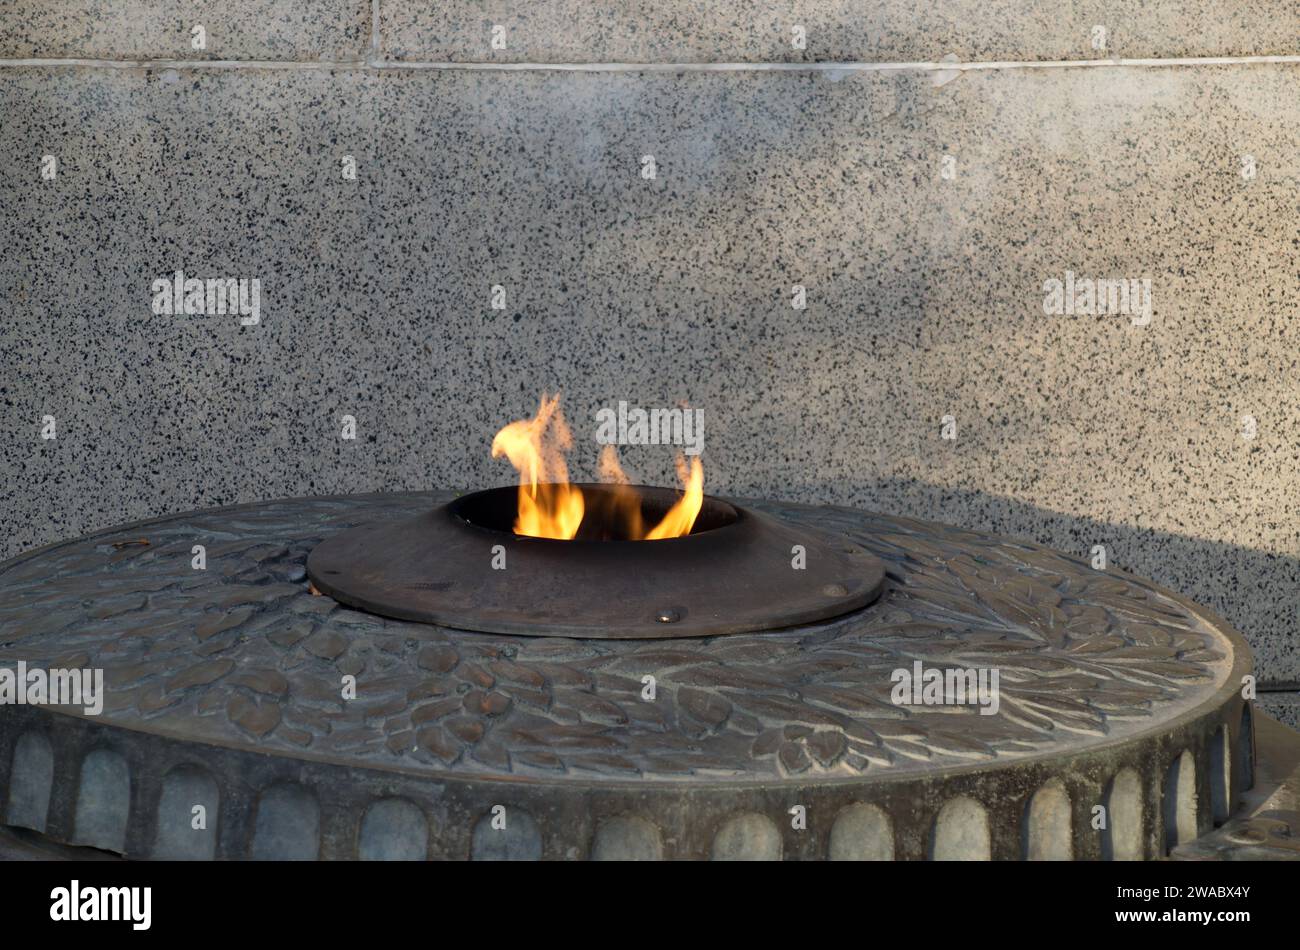 The Eternal Flame at the Monument or Grave to the Unknown Warrior, built in 1981 on the south side of the early Christian church 'St. Sofia' in Sofia, Stock Photo